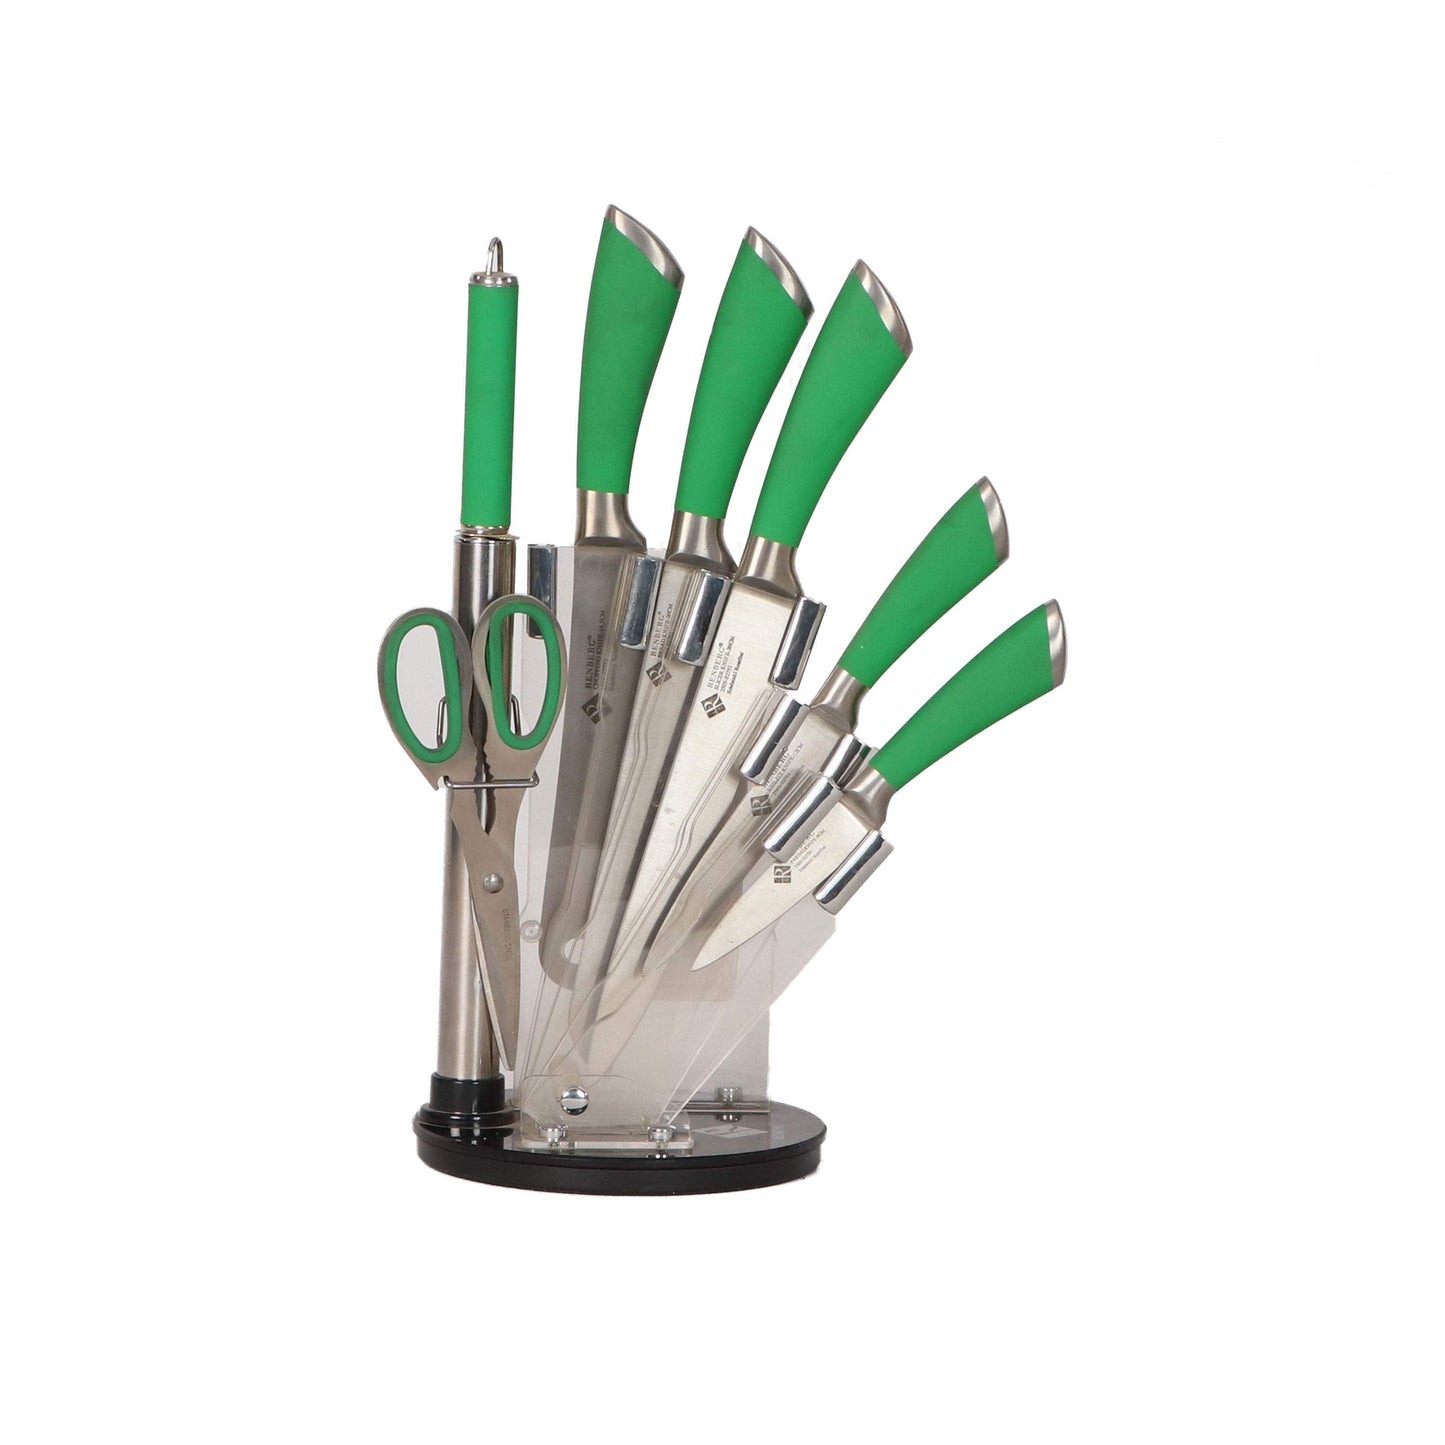 Renberg 8 Piece Knife Block Set With Green Coloured Knife Block-Royal Brands Co-